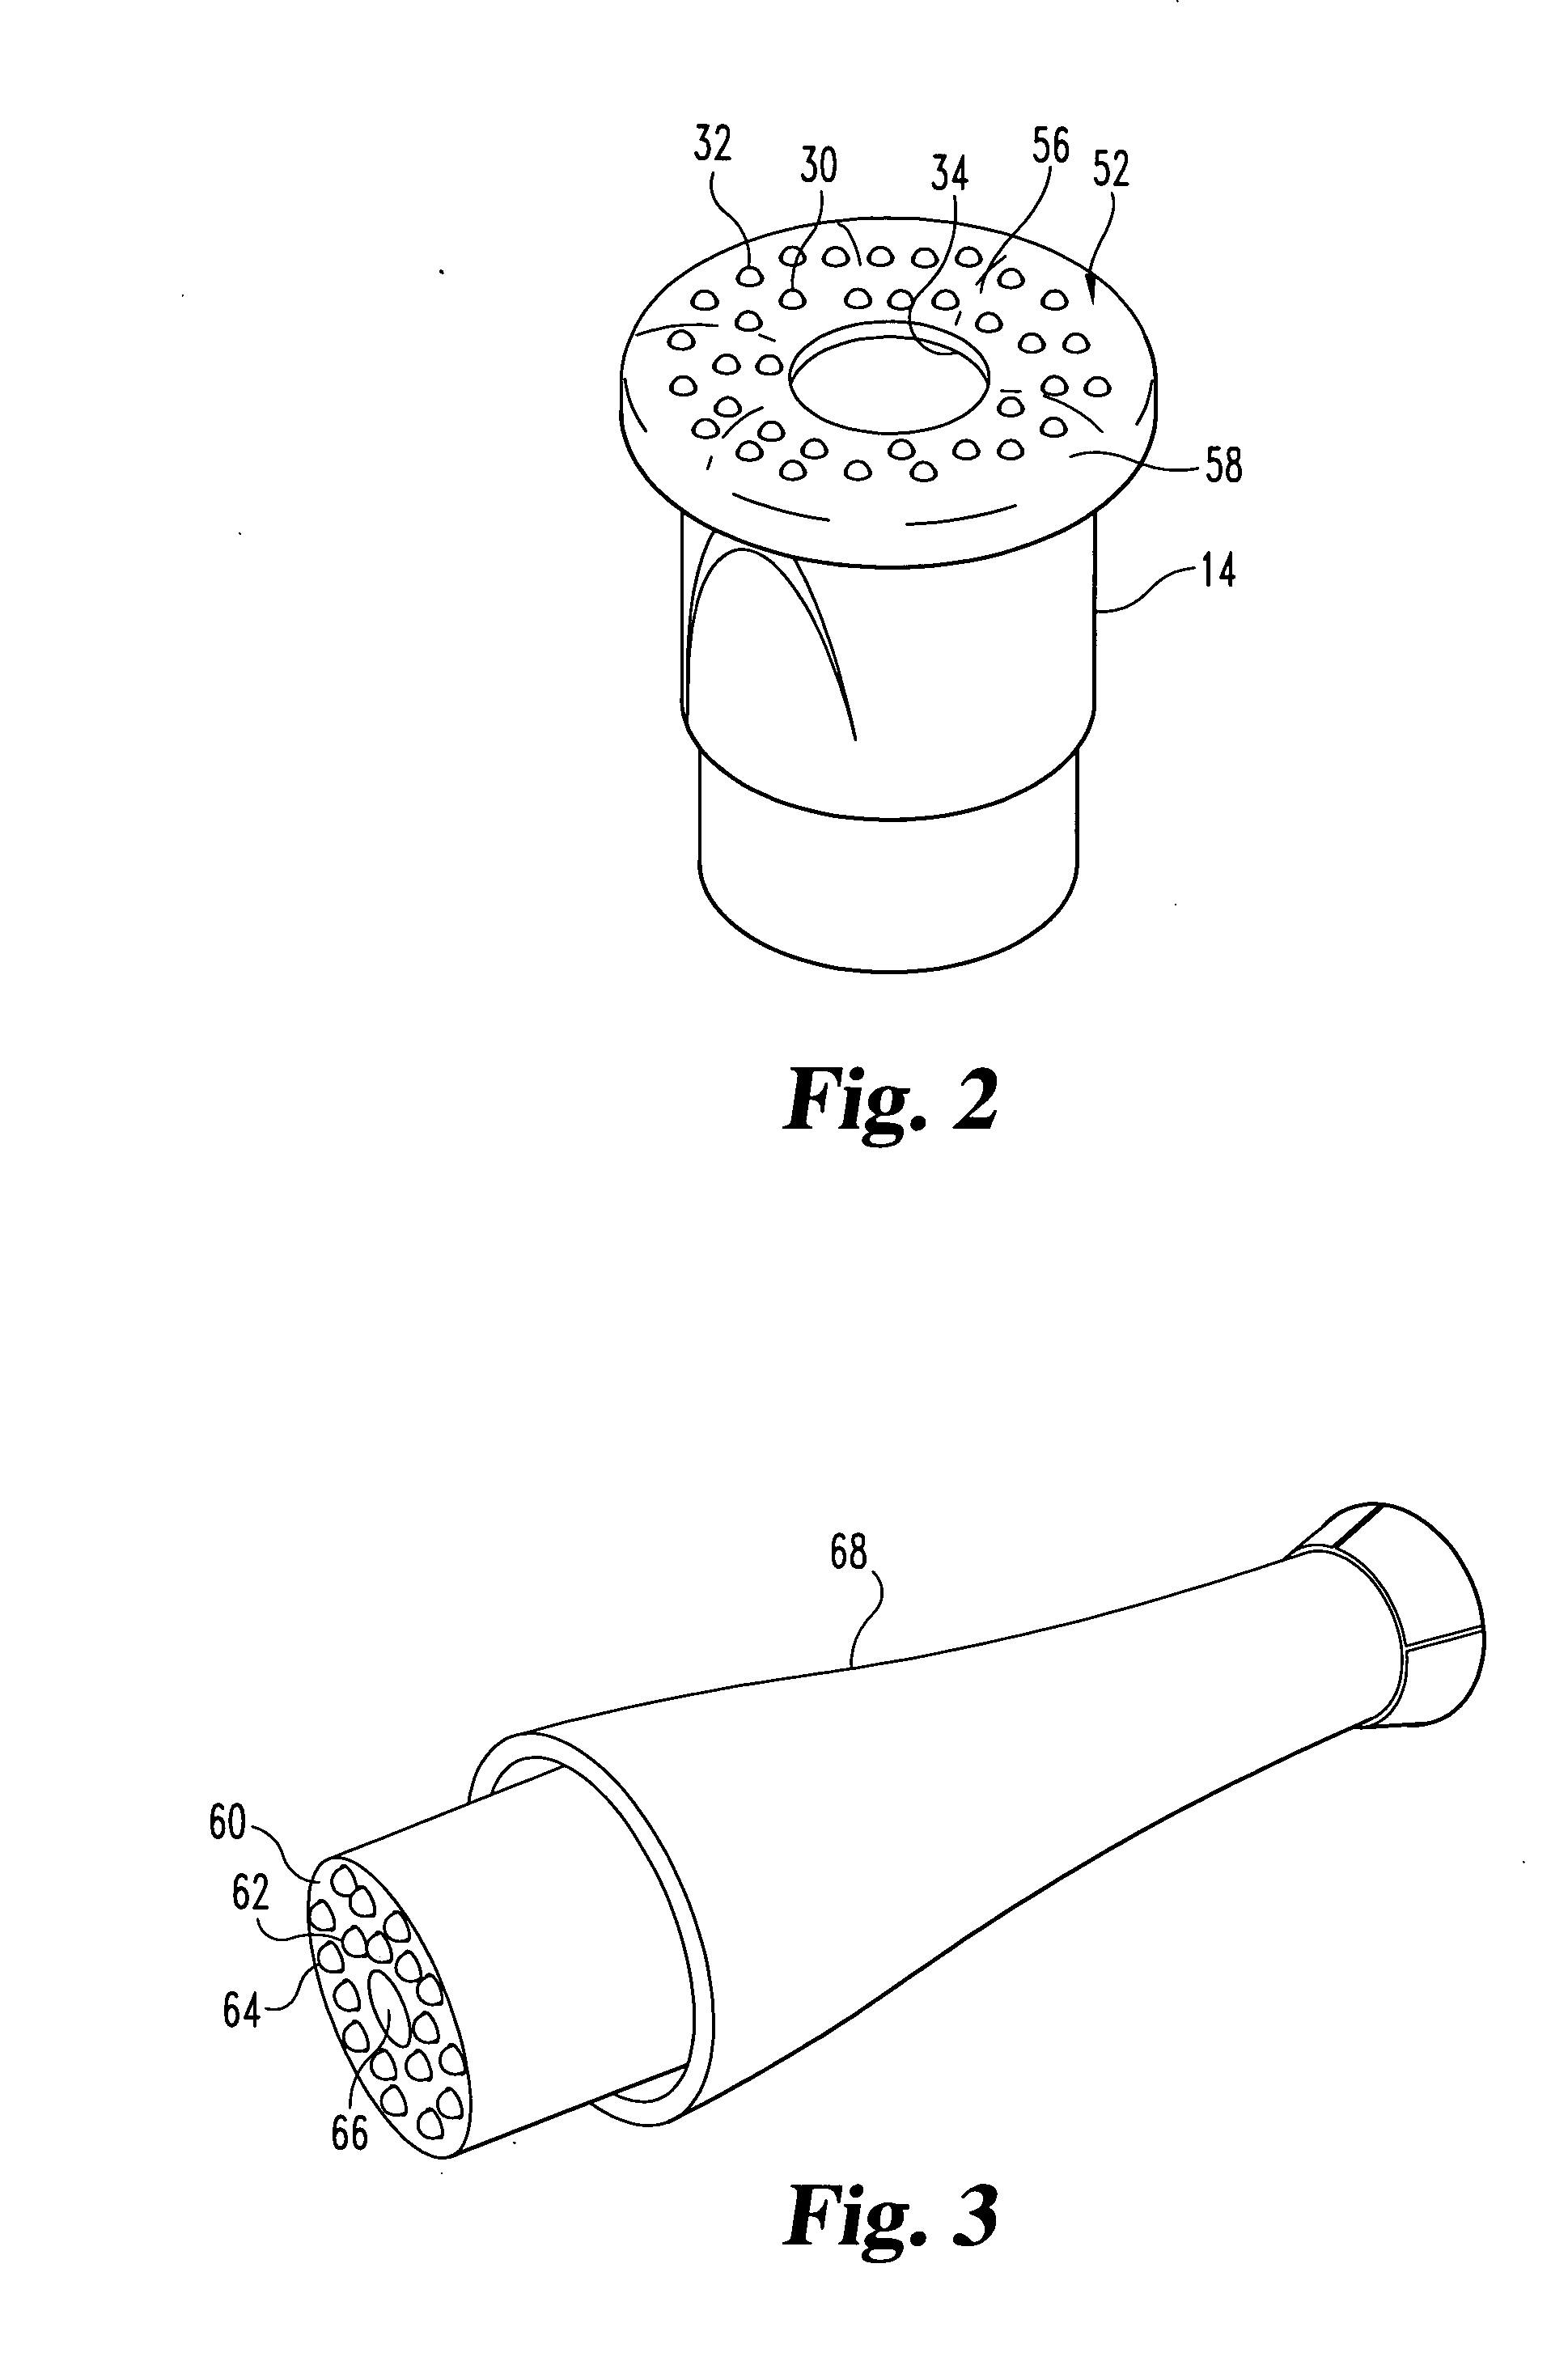 Method and apparatus for electrical stimulation to enhance lancing device performance